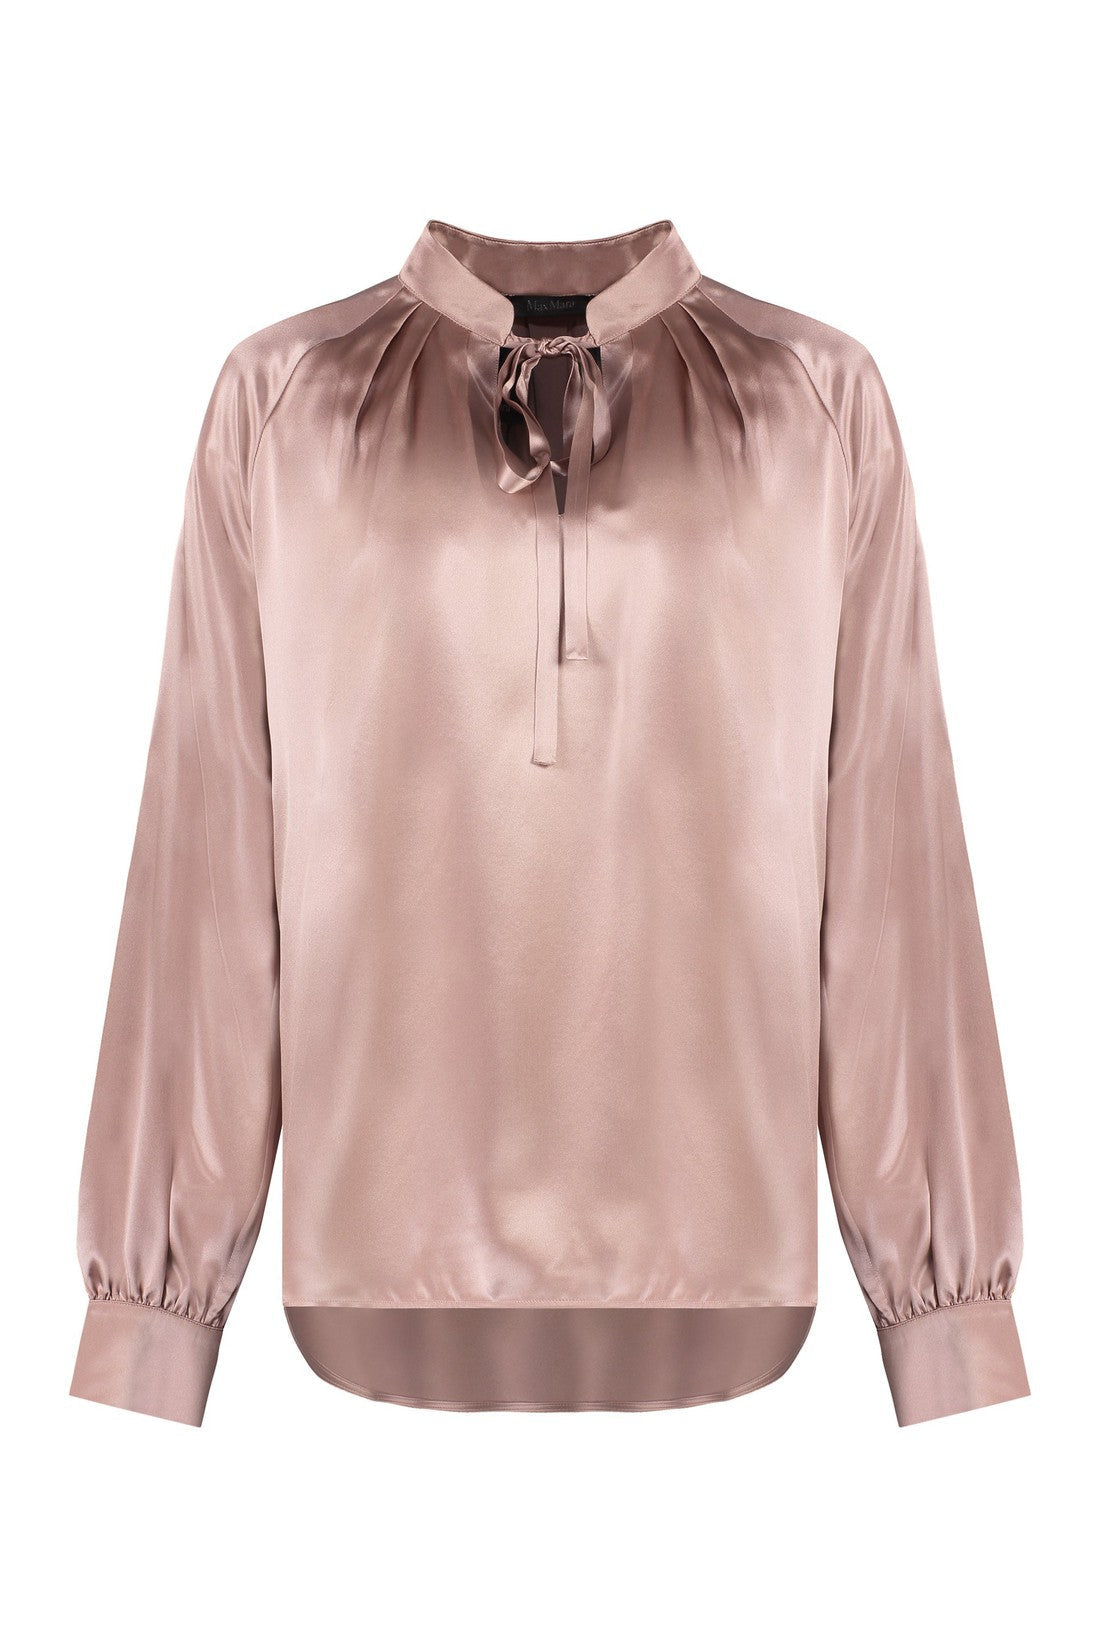 Max Mara-OUTLET-SALE-Tamigi Silk blouse with bow-ARCHIVIST